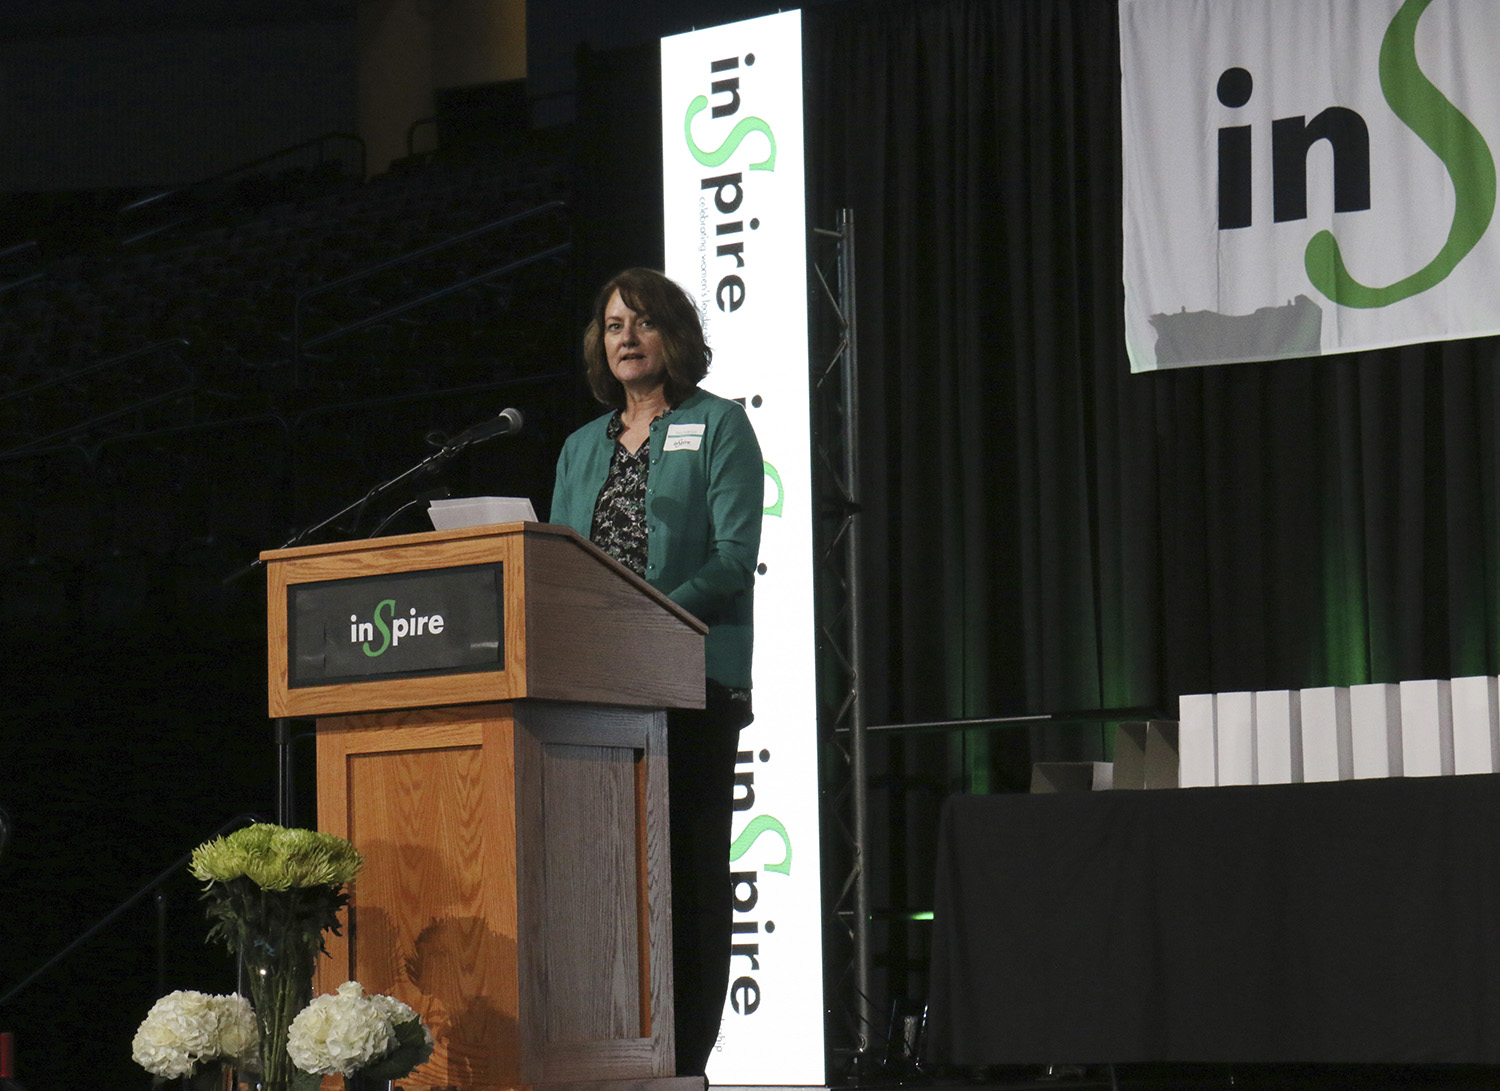  Tracy Anderson at the 2019 Inspire Luncheon at Pinnacle Bank Arena on Sept. 18, 2019.